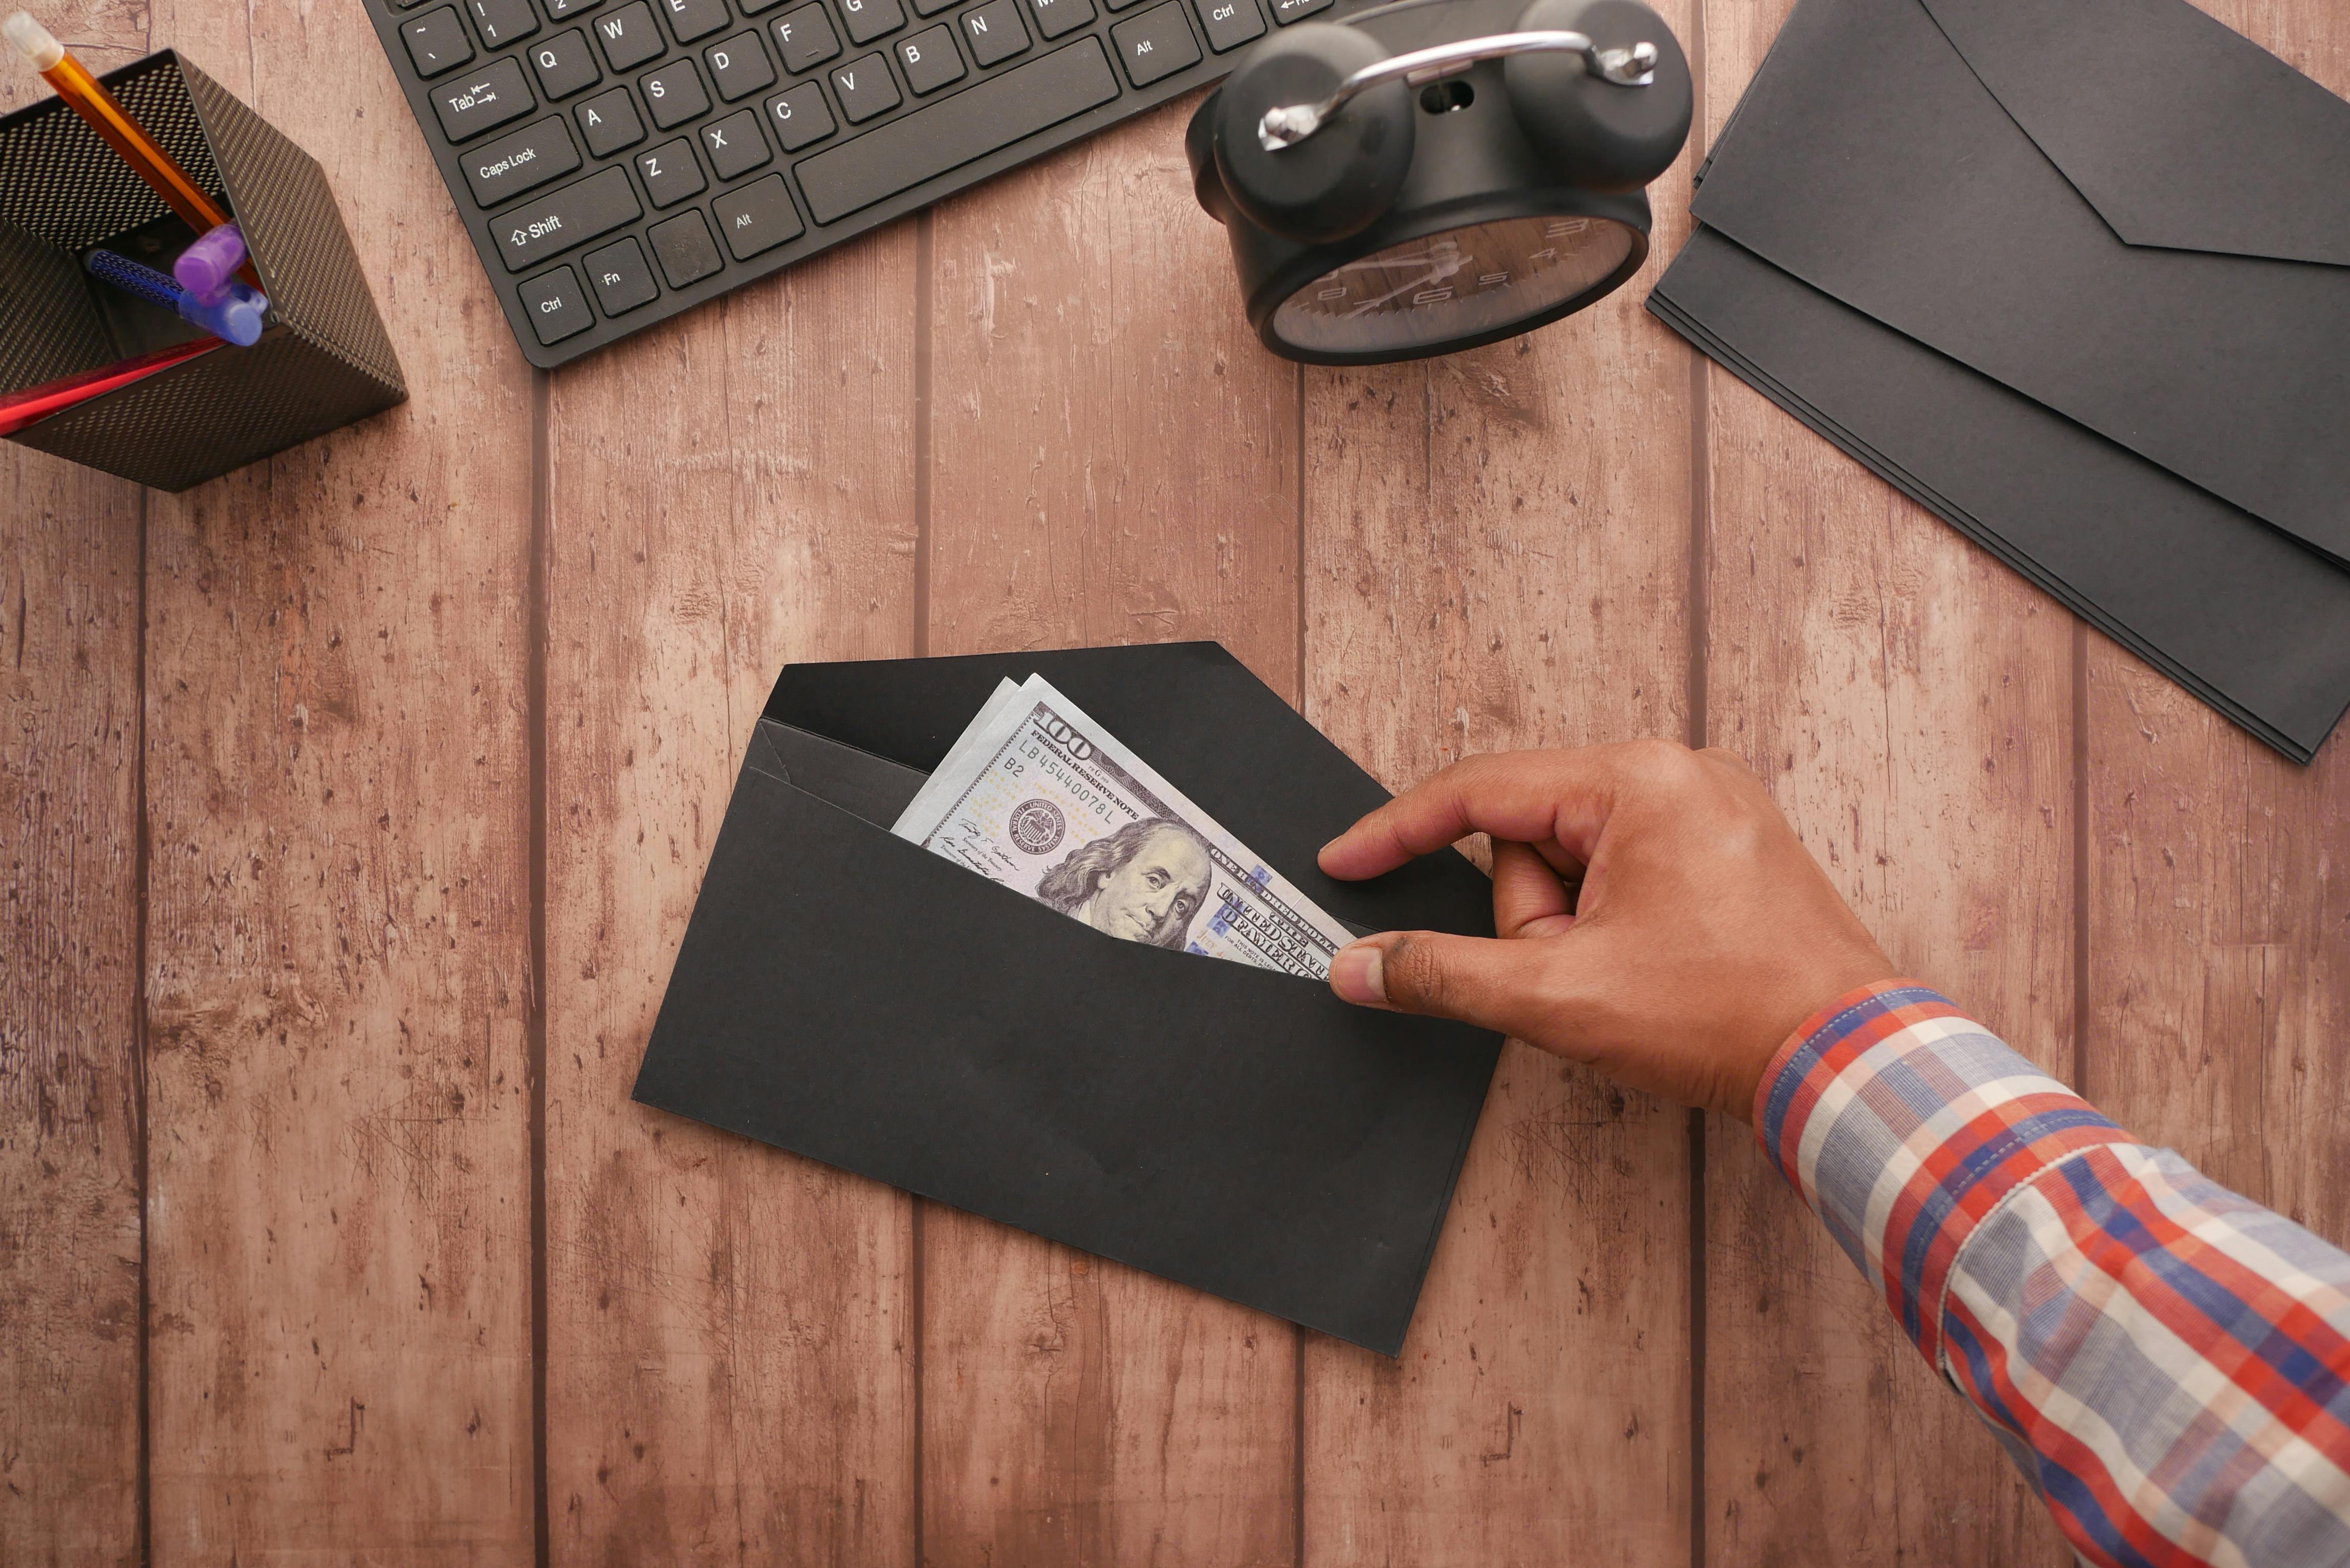 Man checking the money in the envelope | Source: Pexels